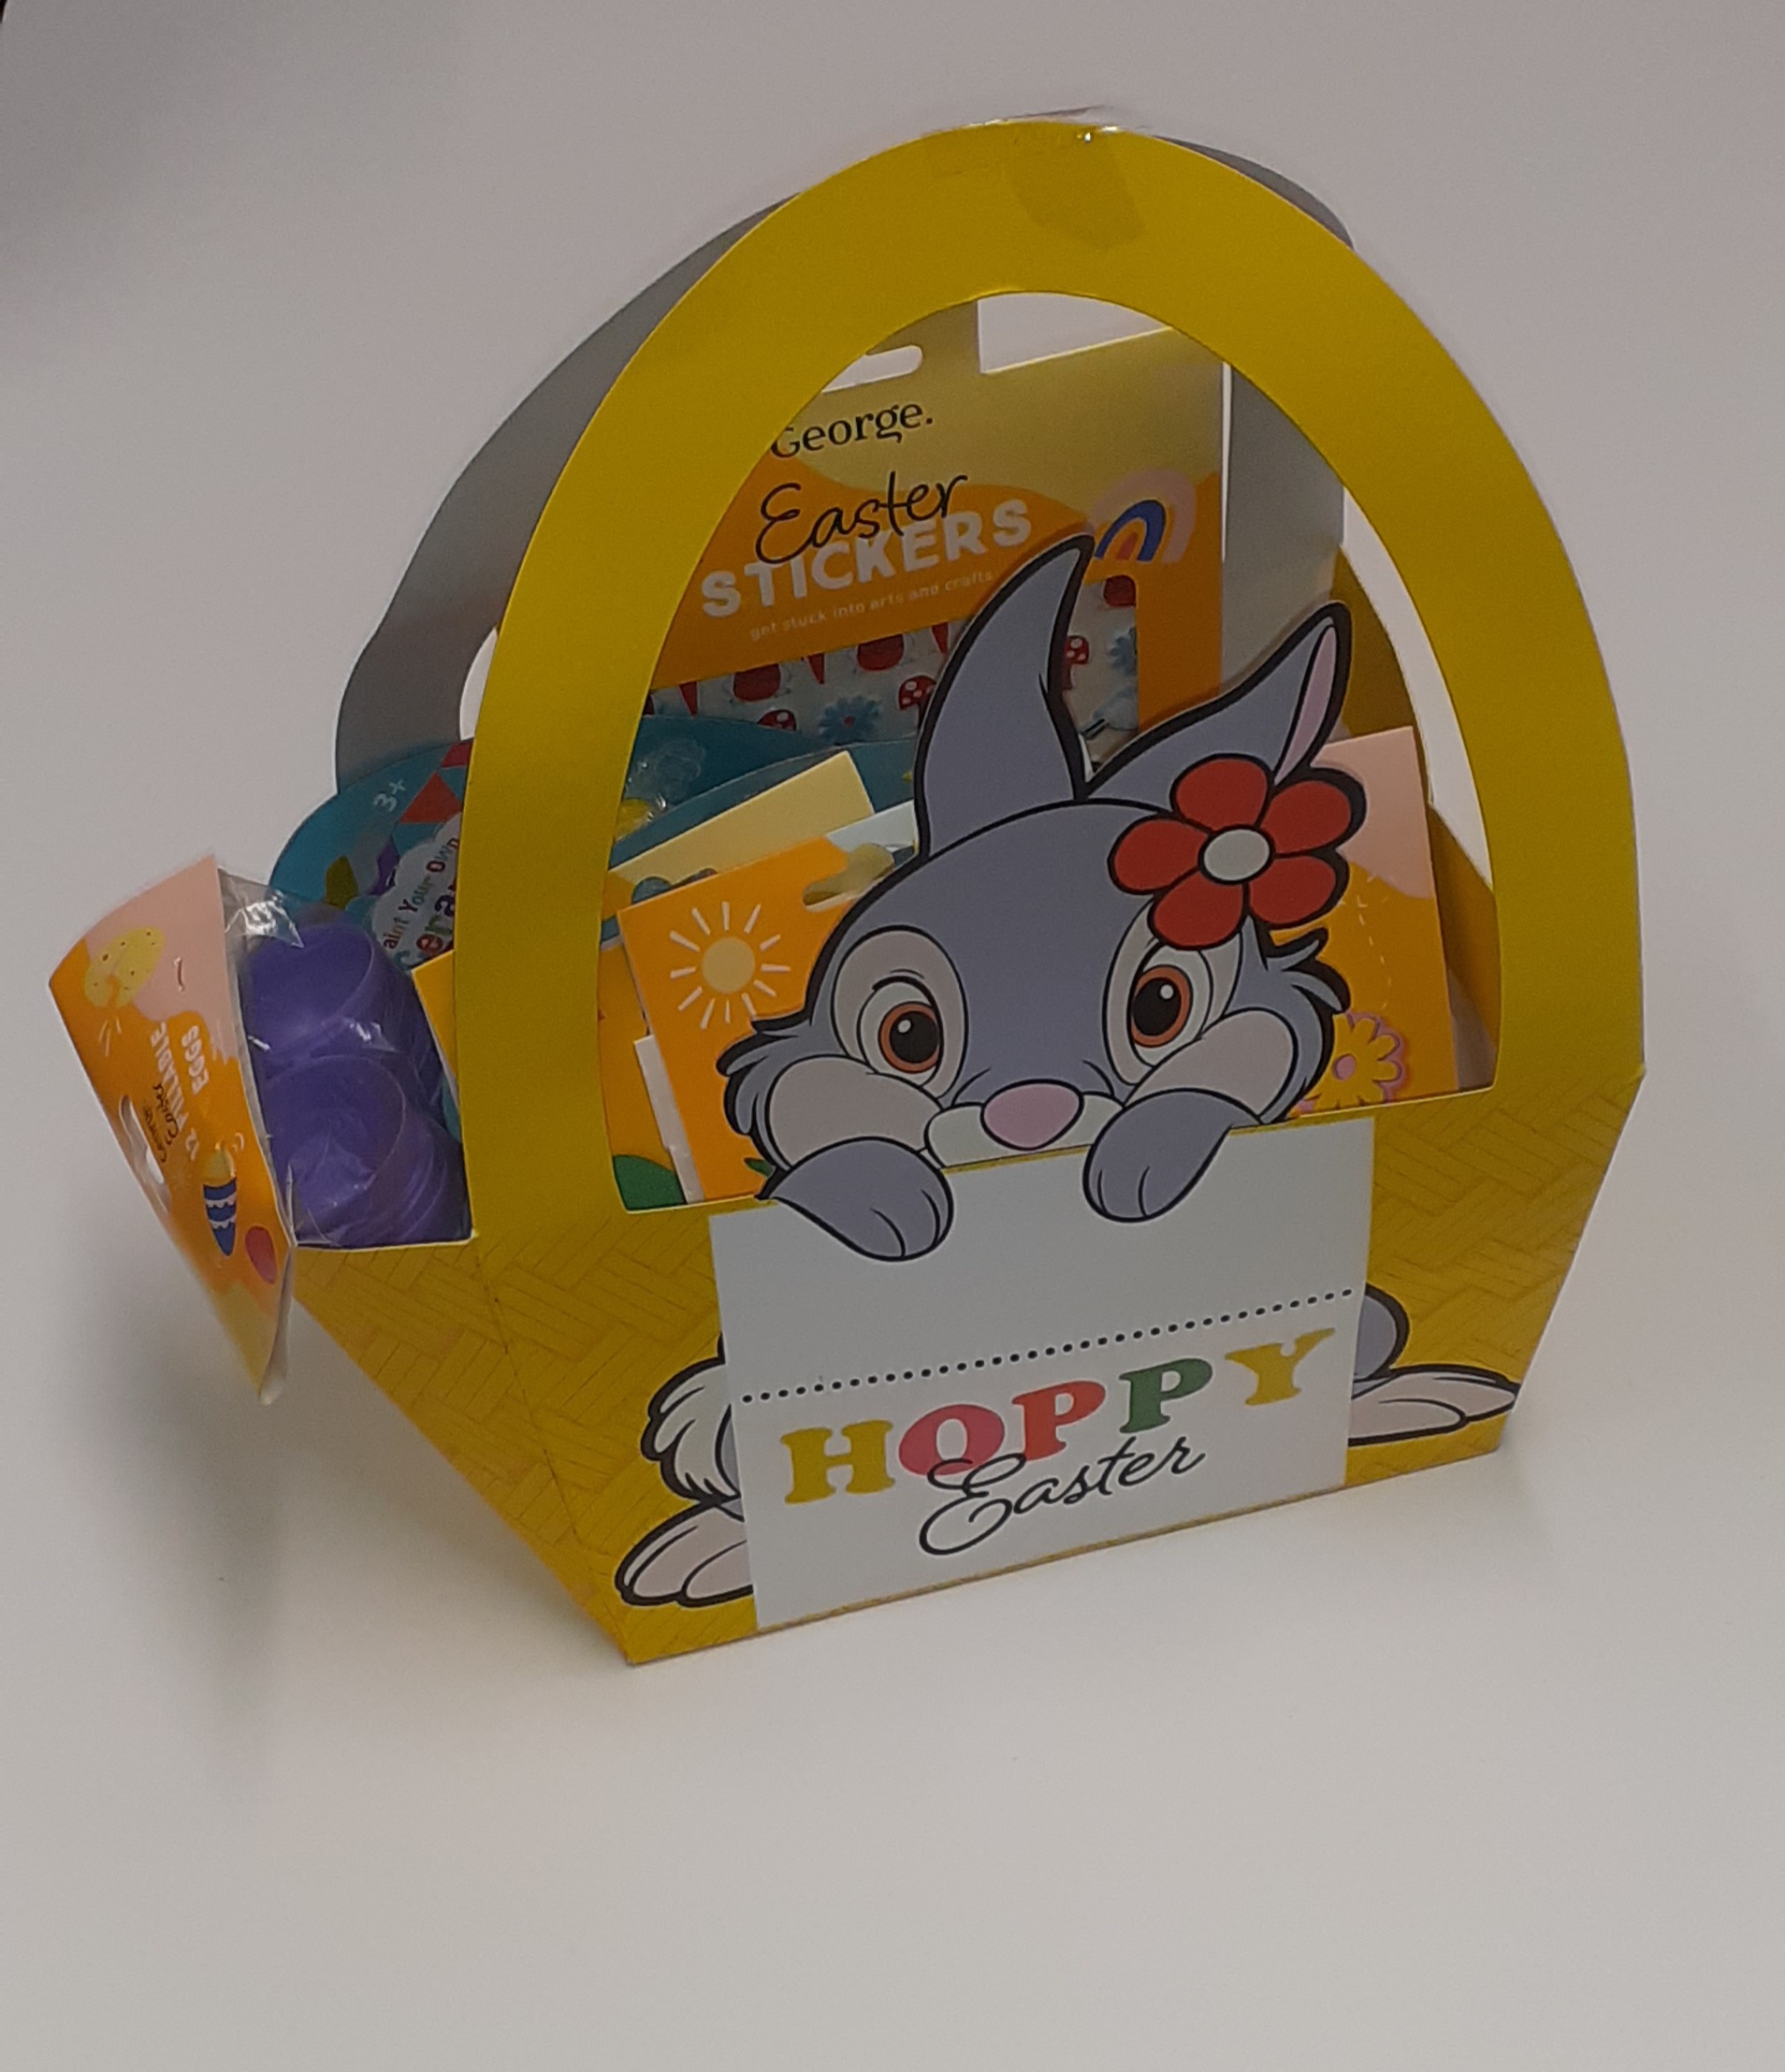 George Hoppy Easter Childs Design & Decorating Gift Bundle RRP £11.99 CLEARANCE XL £4.99